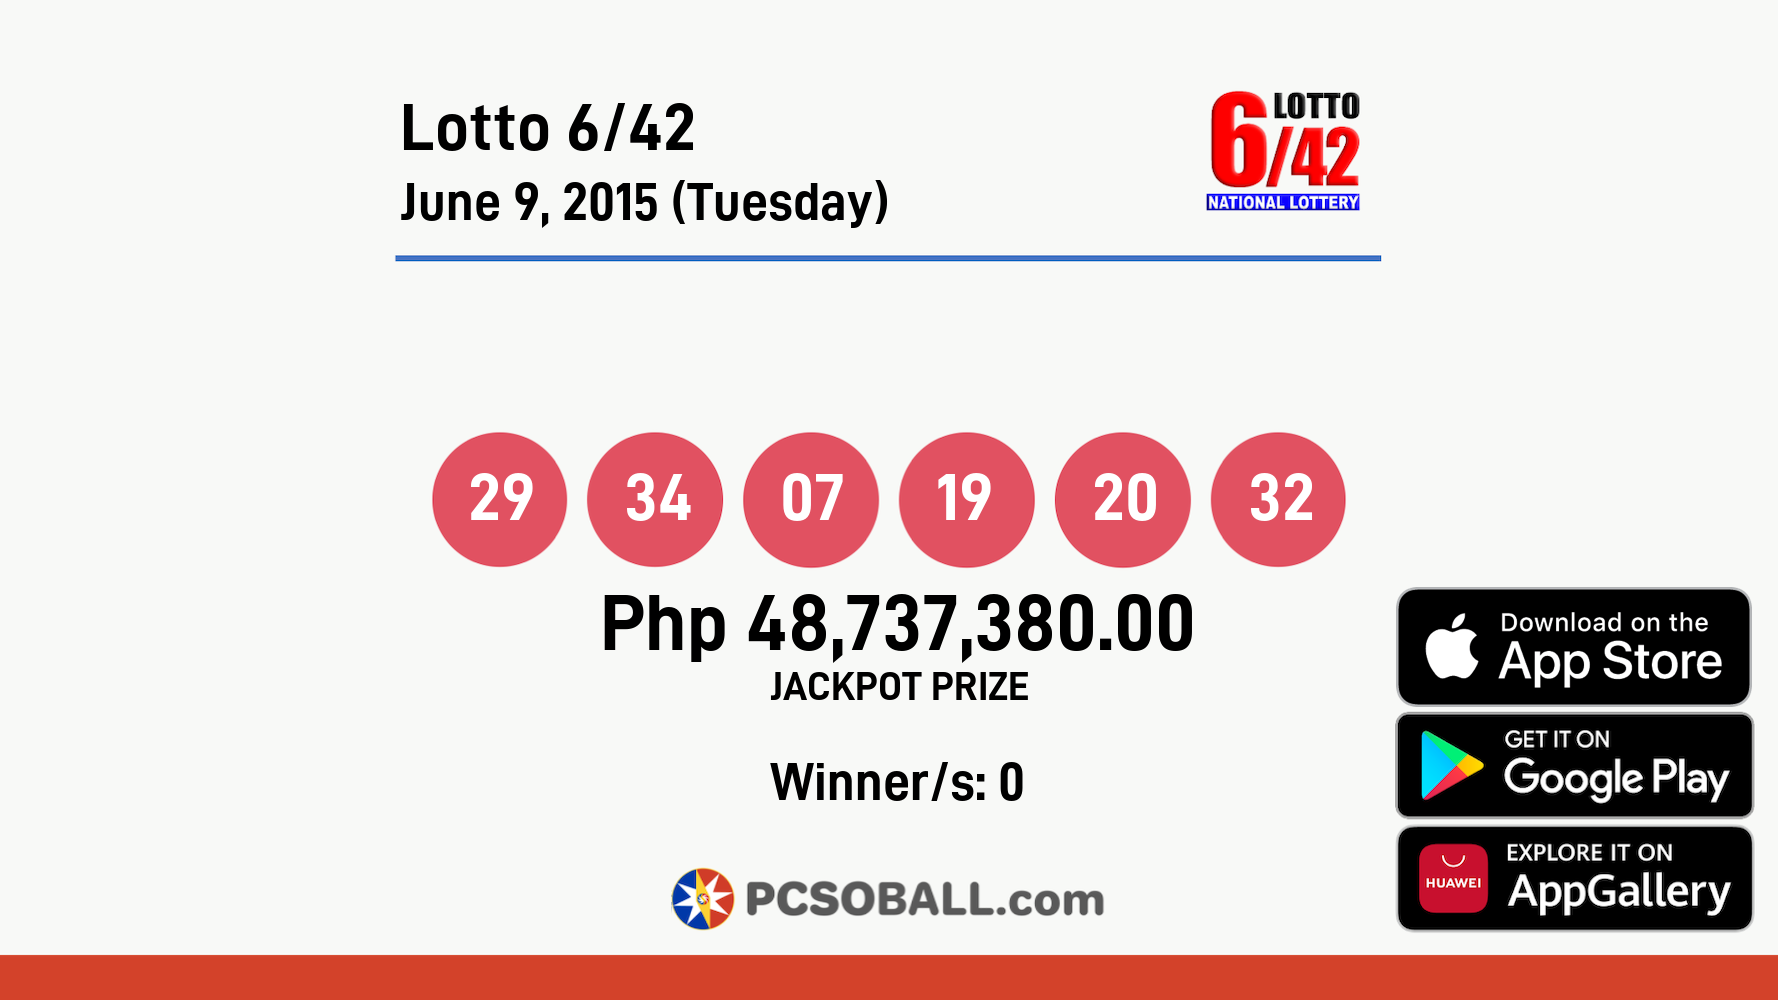 Lotto 6/42 June 9, 2015 (Tuesday) Result